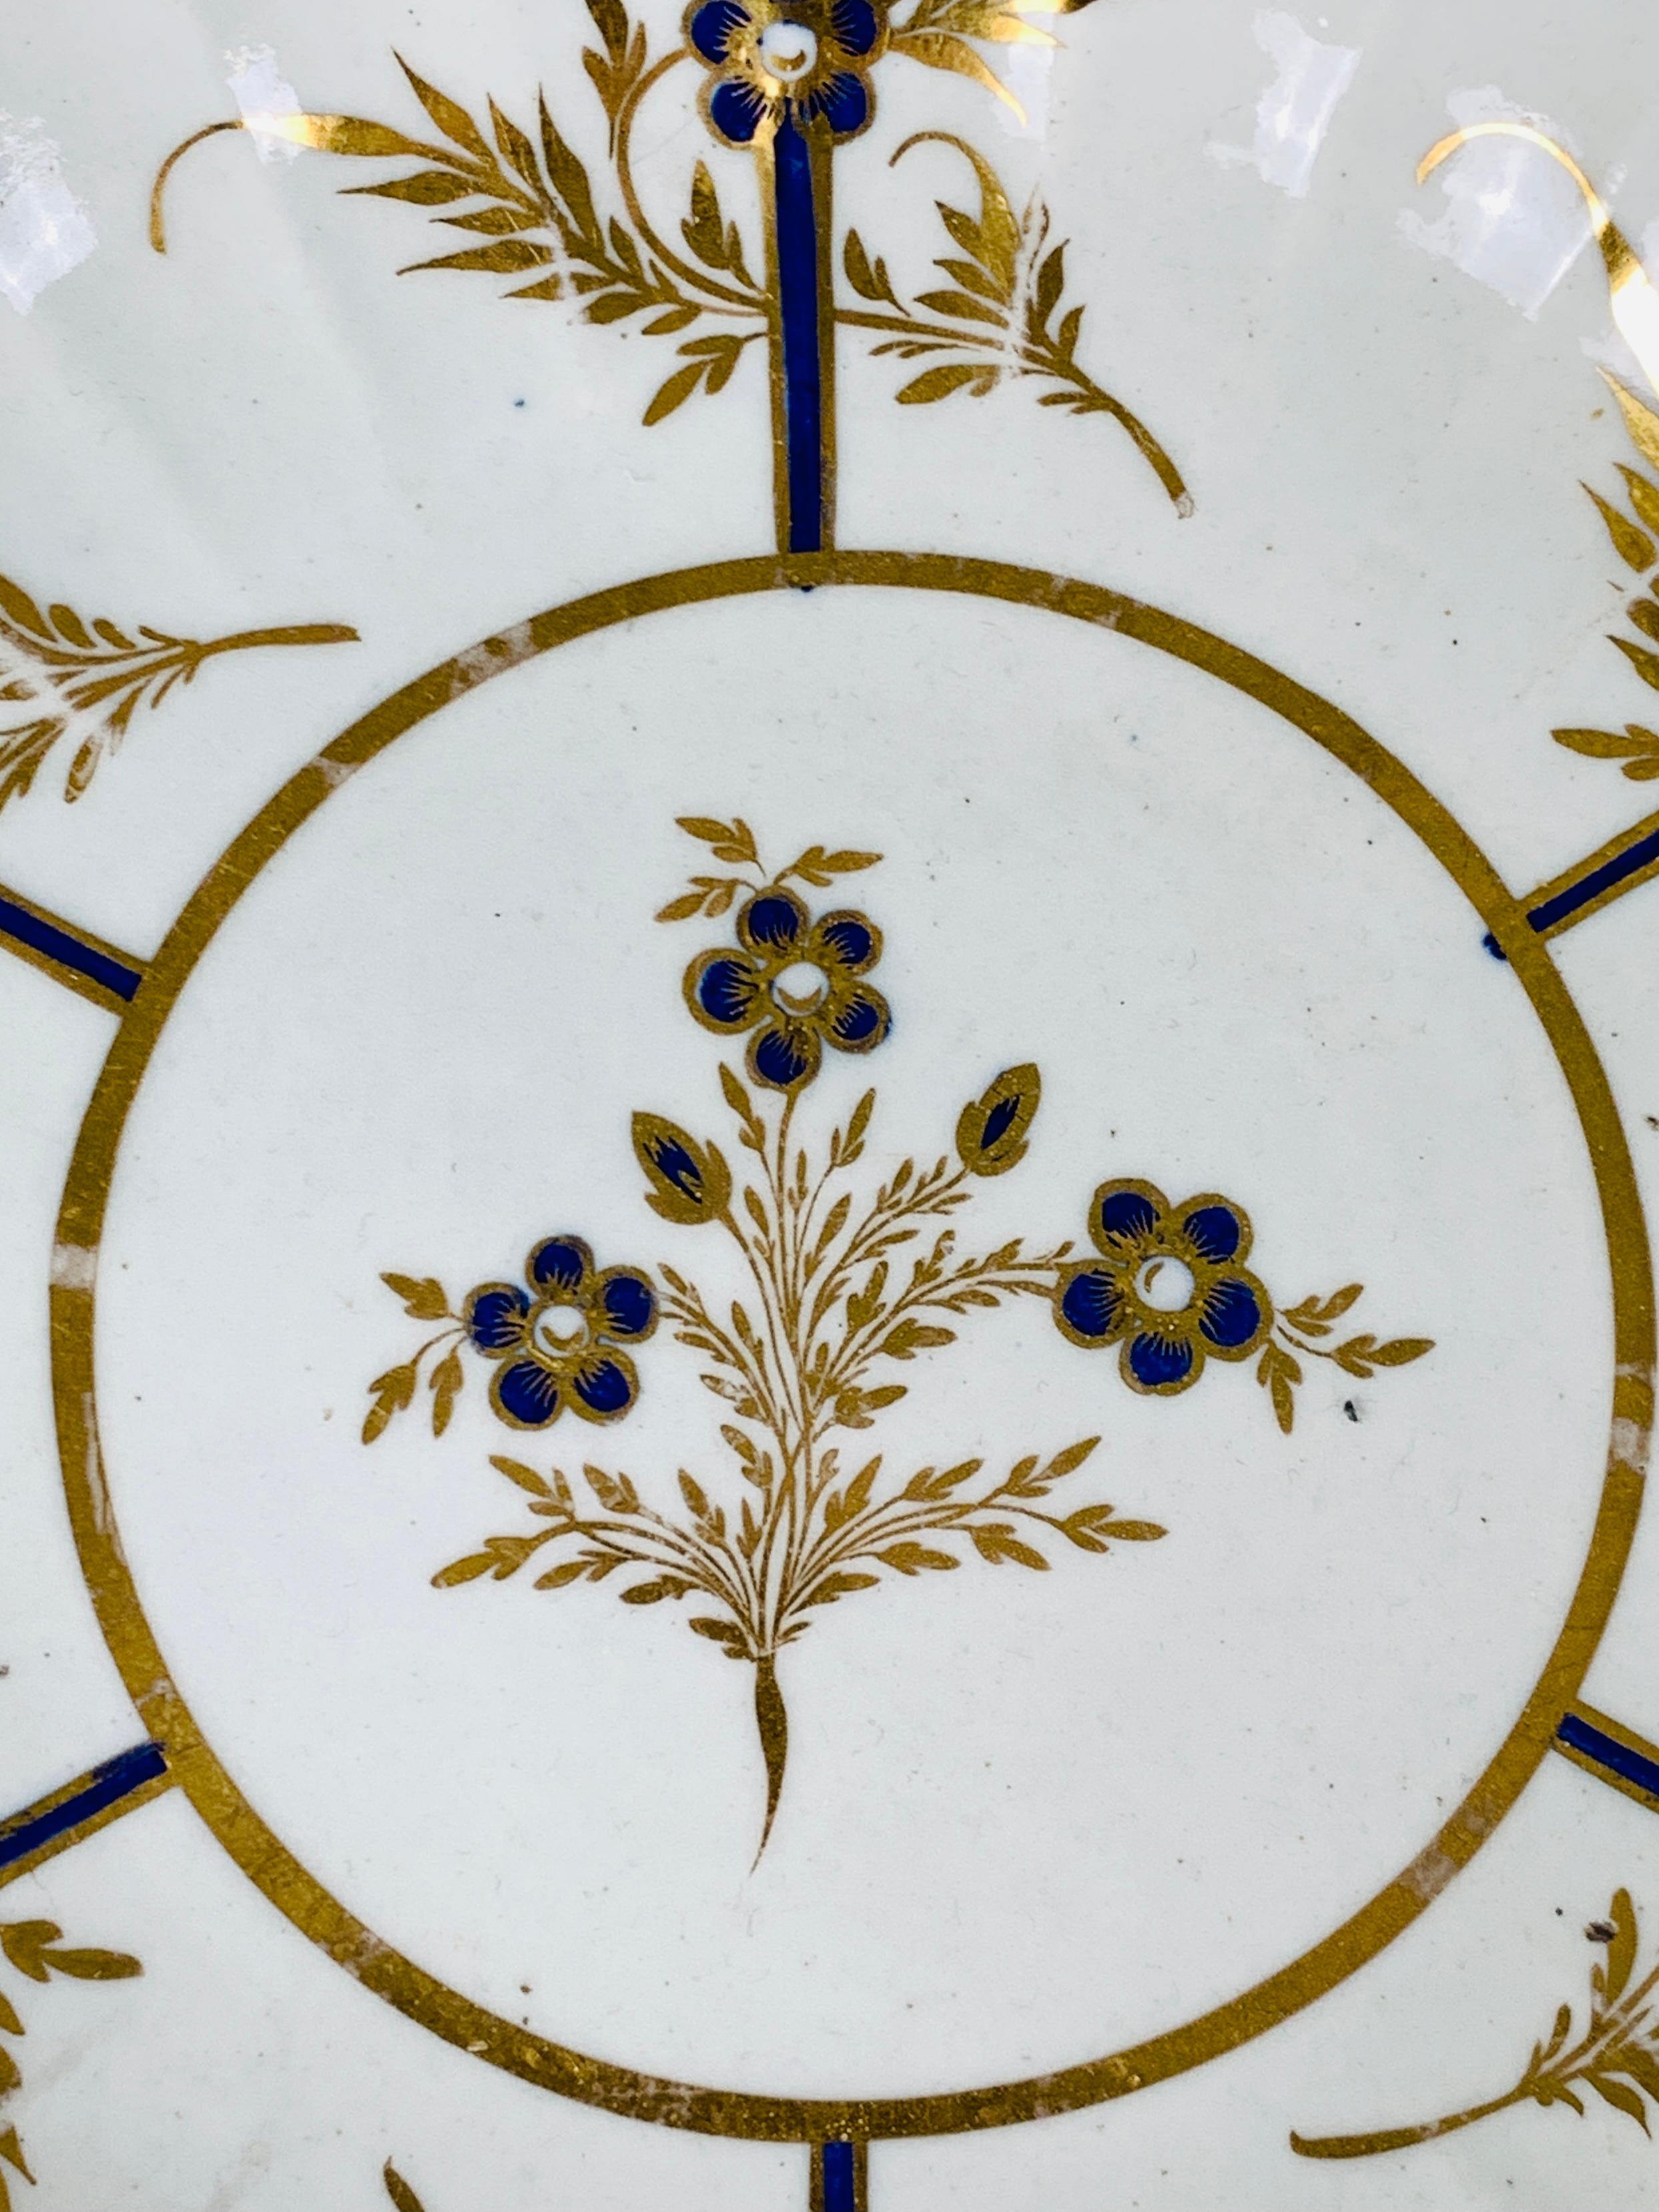 This exquisite late 18th-century dish features several elements that make it so full of life.
First is the splendid hand-painted goldwork. 
This gilding enlivens the dish with its hand-painted golden vines, leaves, and edge. 
Additionally, the